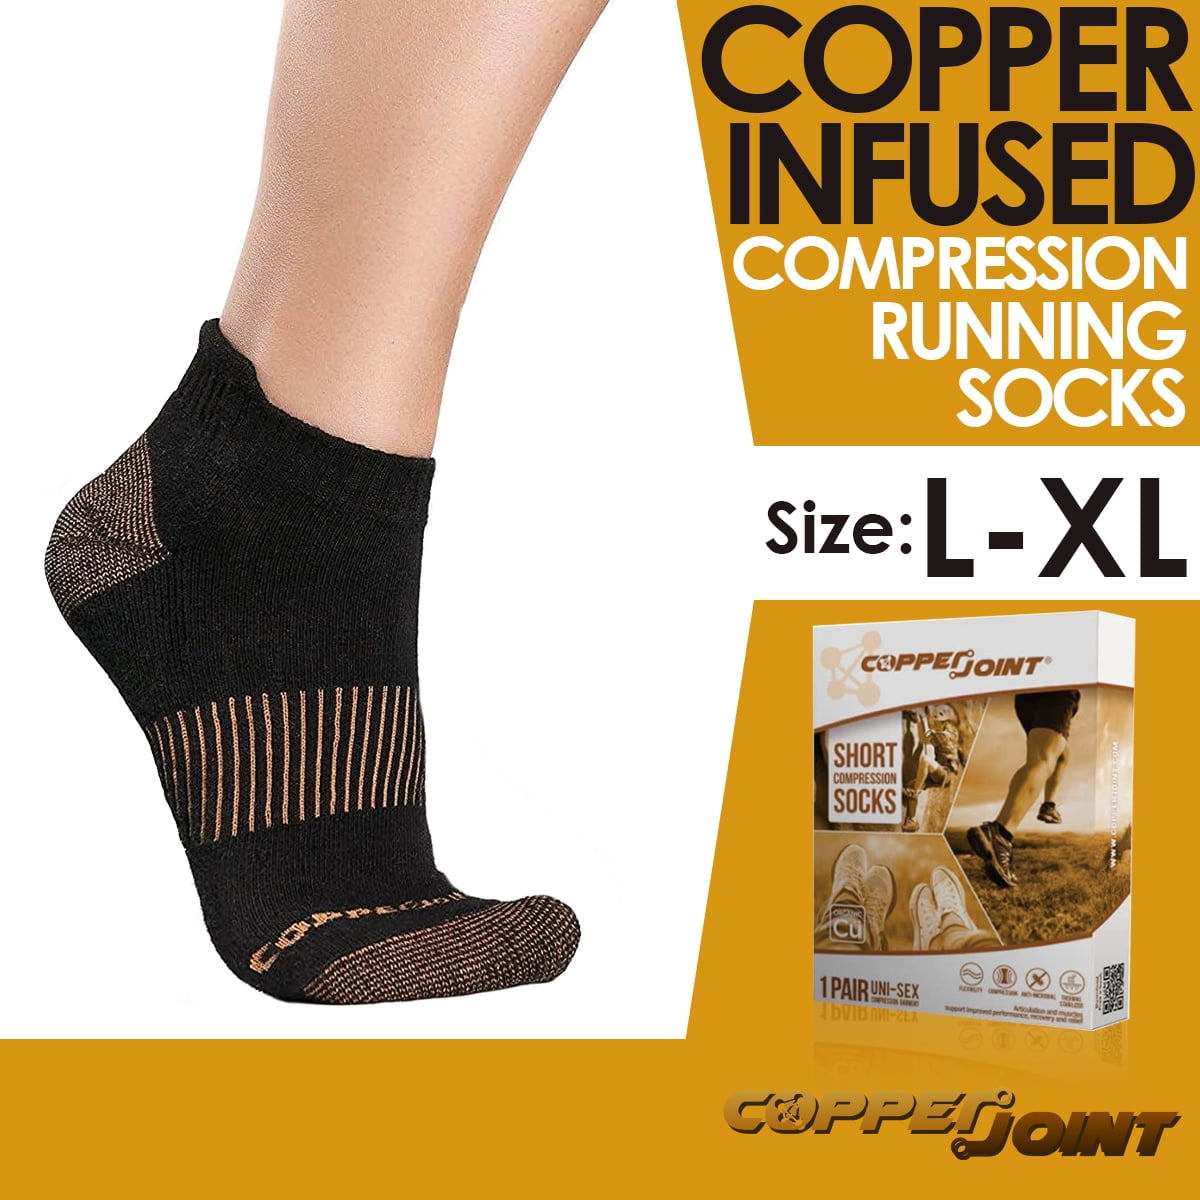 Sports Copper Compression Plantar Fasciitis Socks Men & Women 3 to 12 Pairs Compression Running Socks for Athletic Medical